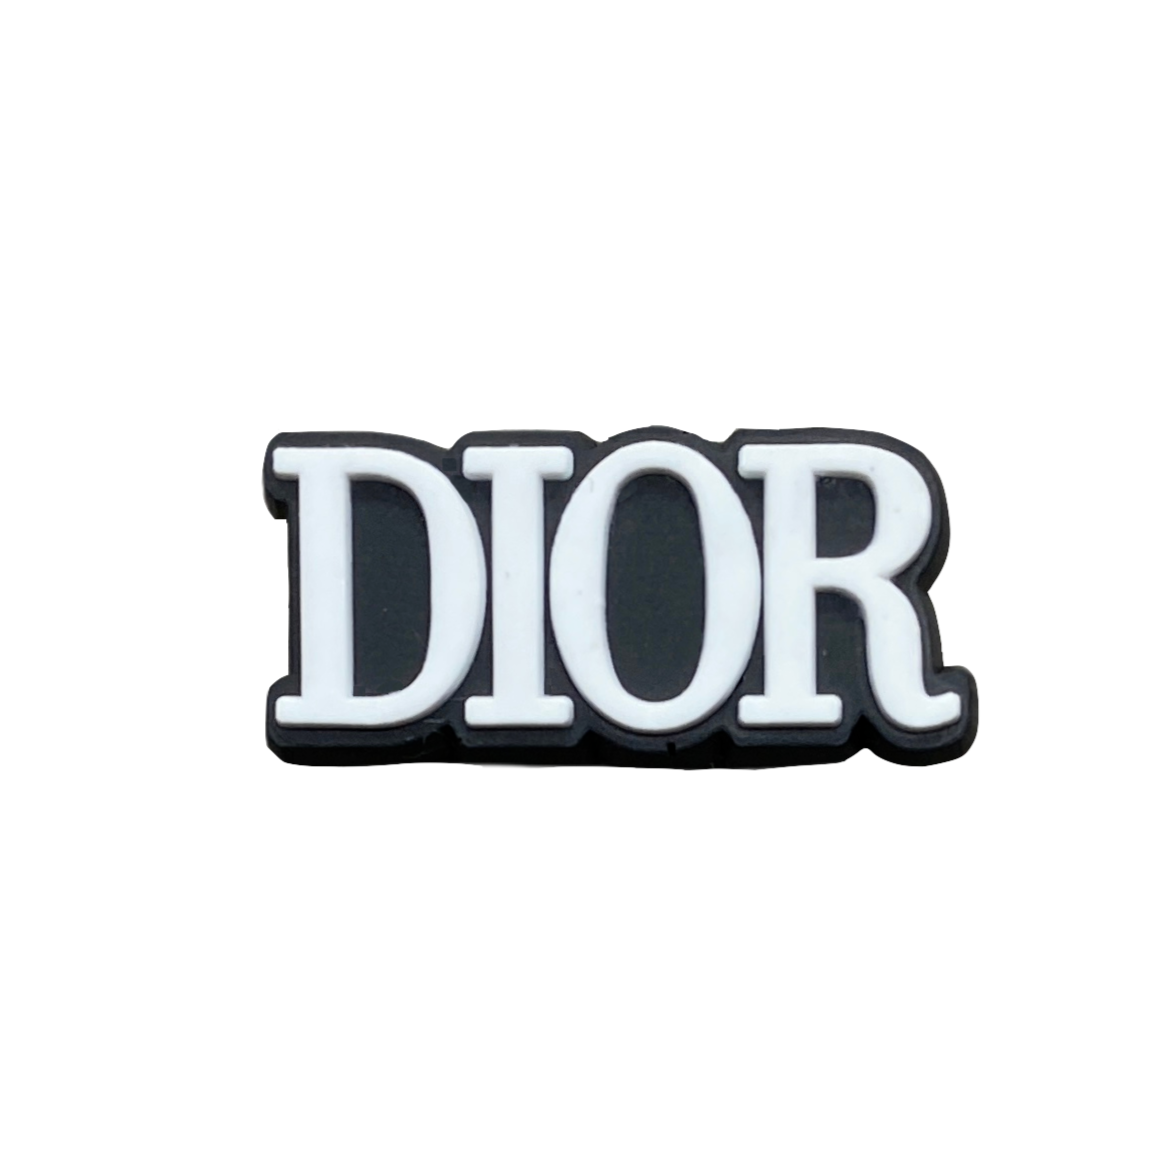 Dior Croc Charm – Hall of Trends